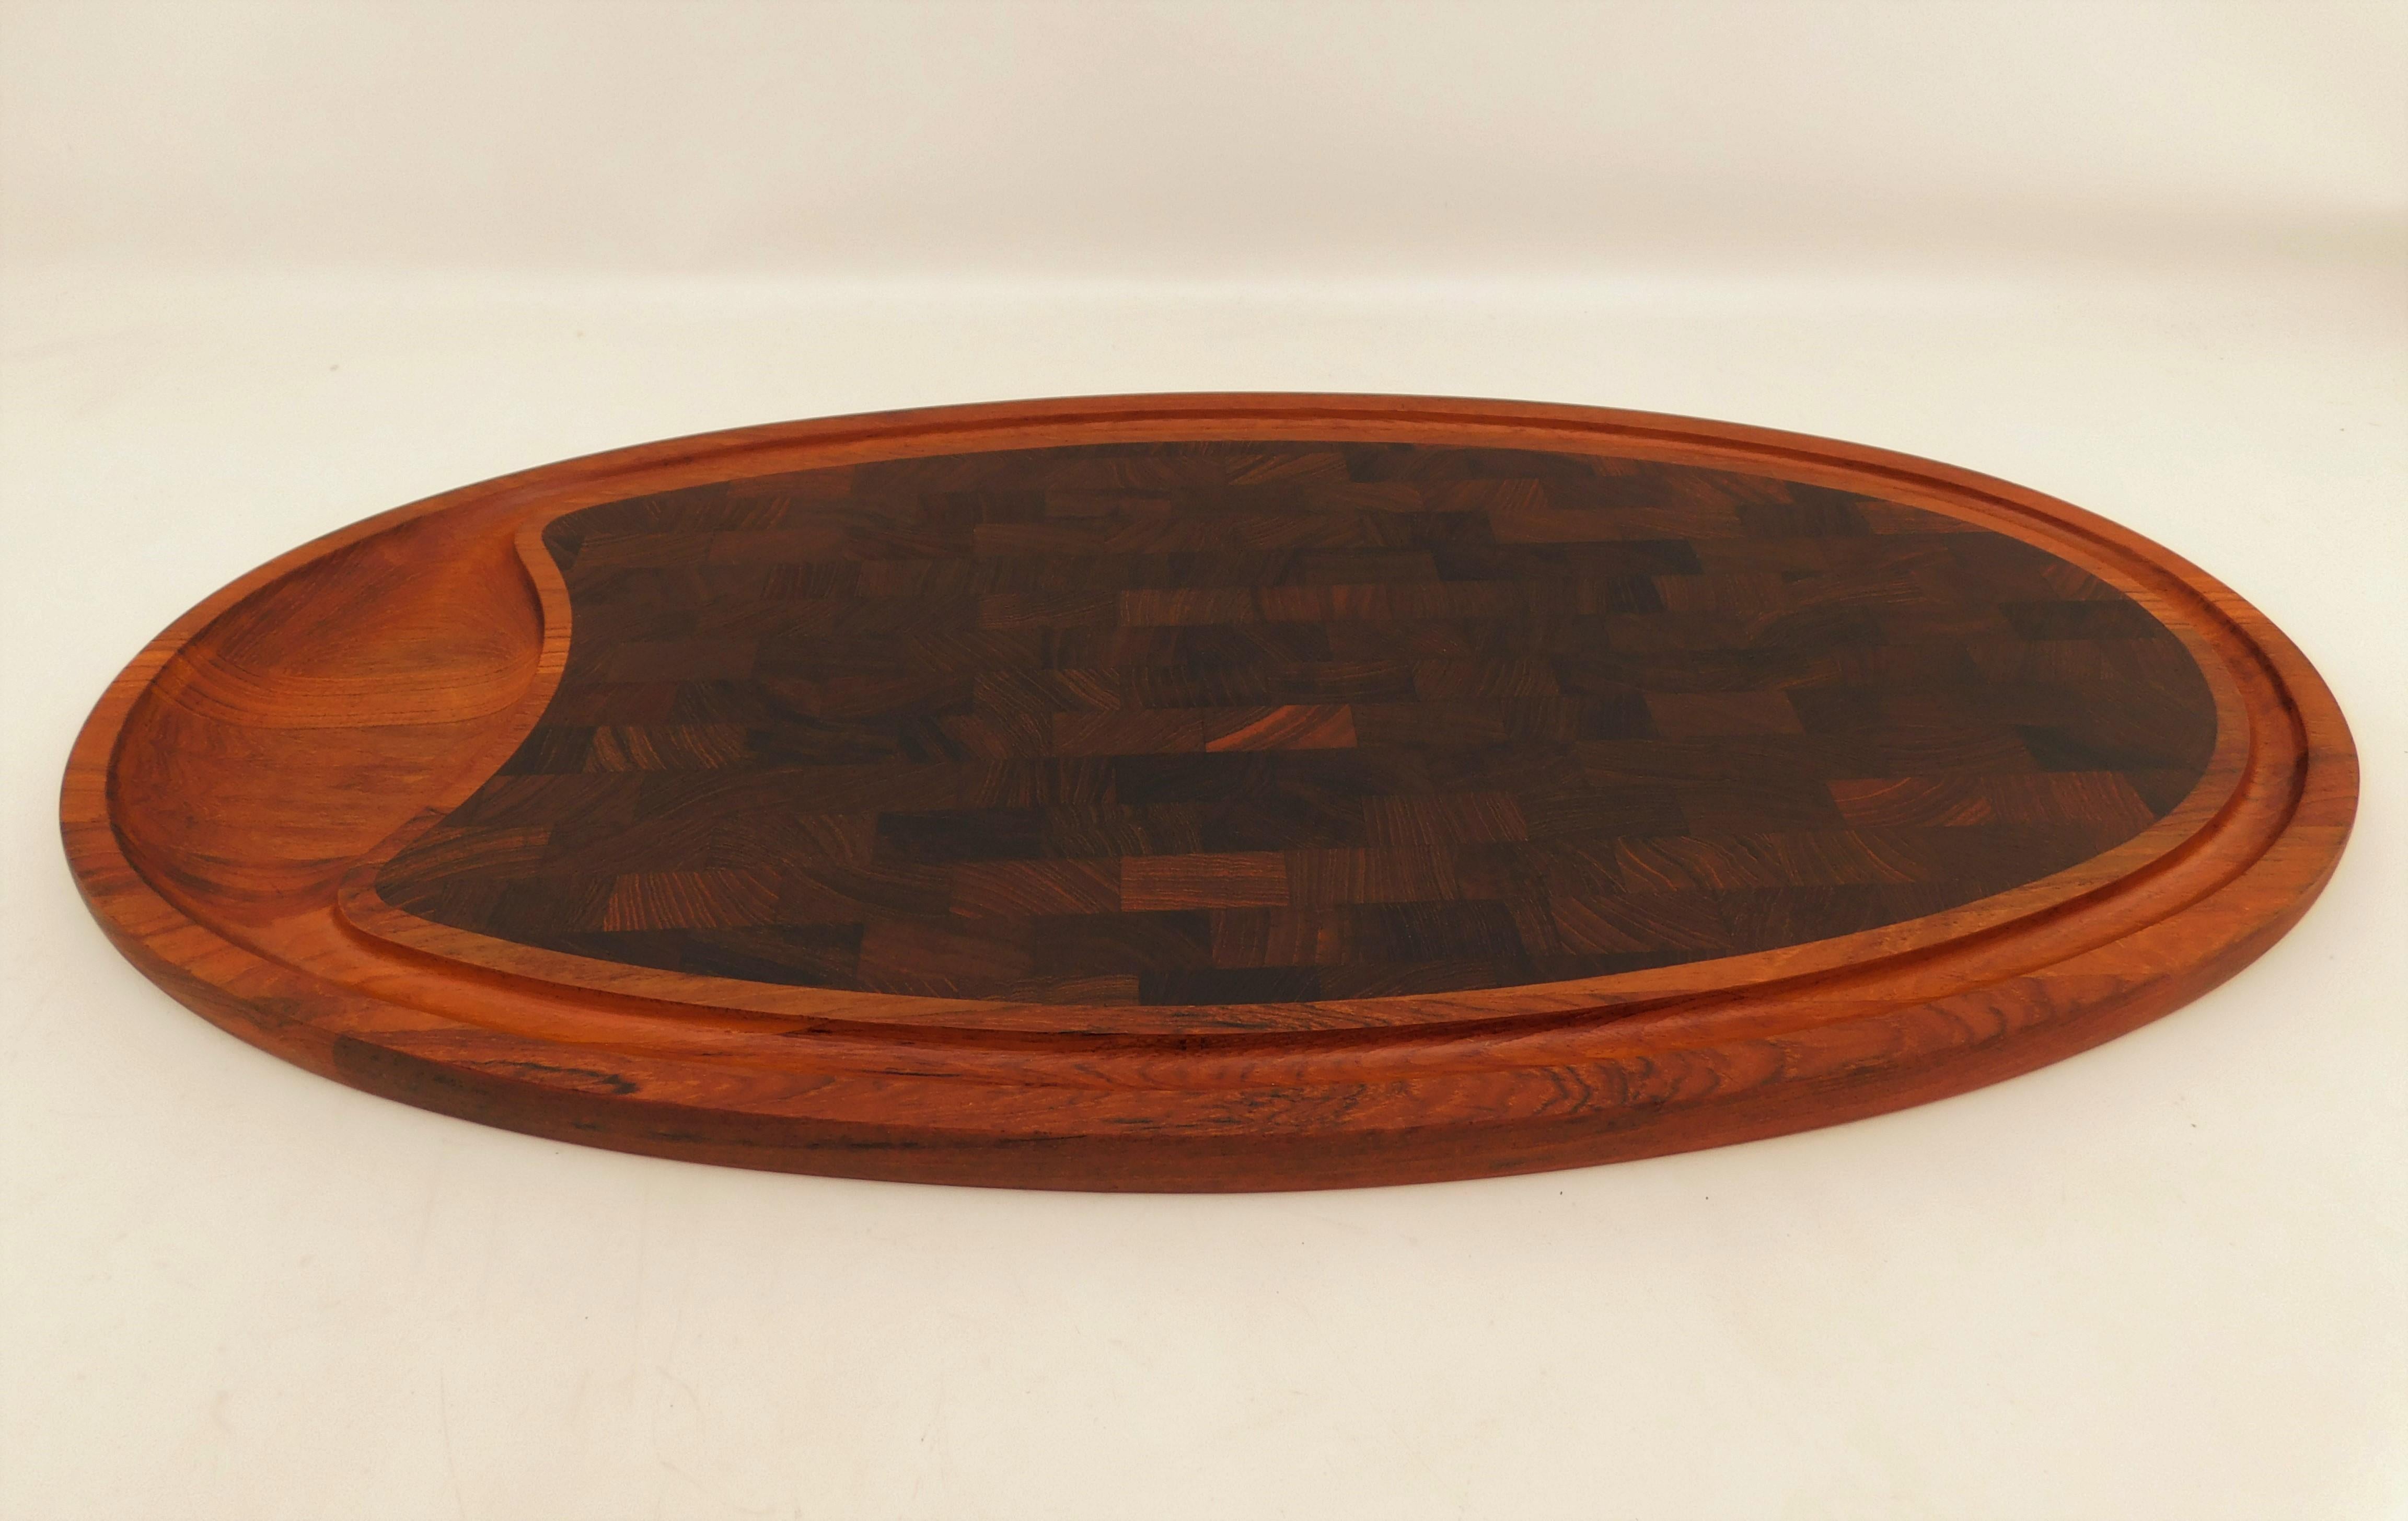 Large mid-century Scandinavian Modern cutting board serving tray in teak wood designed by Jens H. Quistgaard for Dansk Design, Denmark THQ. This versatile piece is the perfect tool for carving and serving featuring a hardwood end grain center and